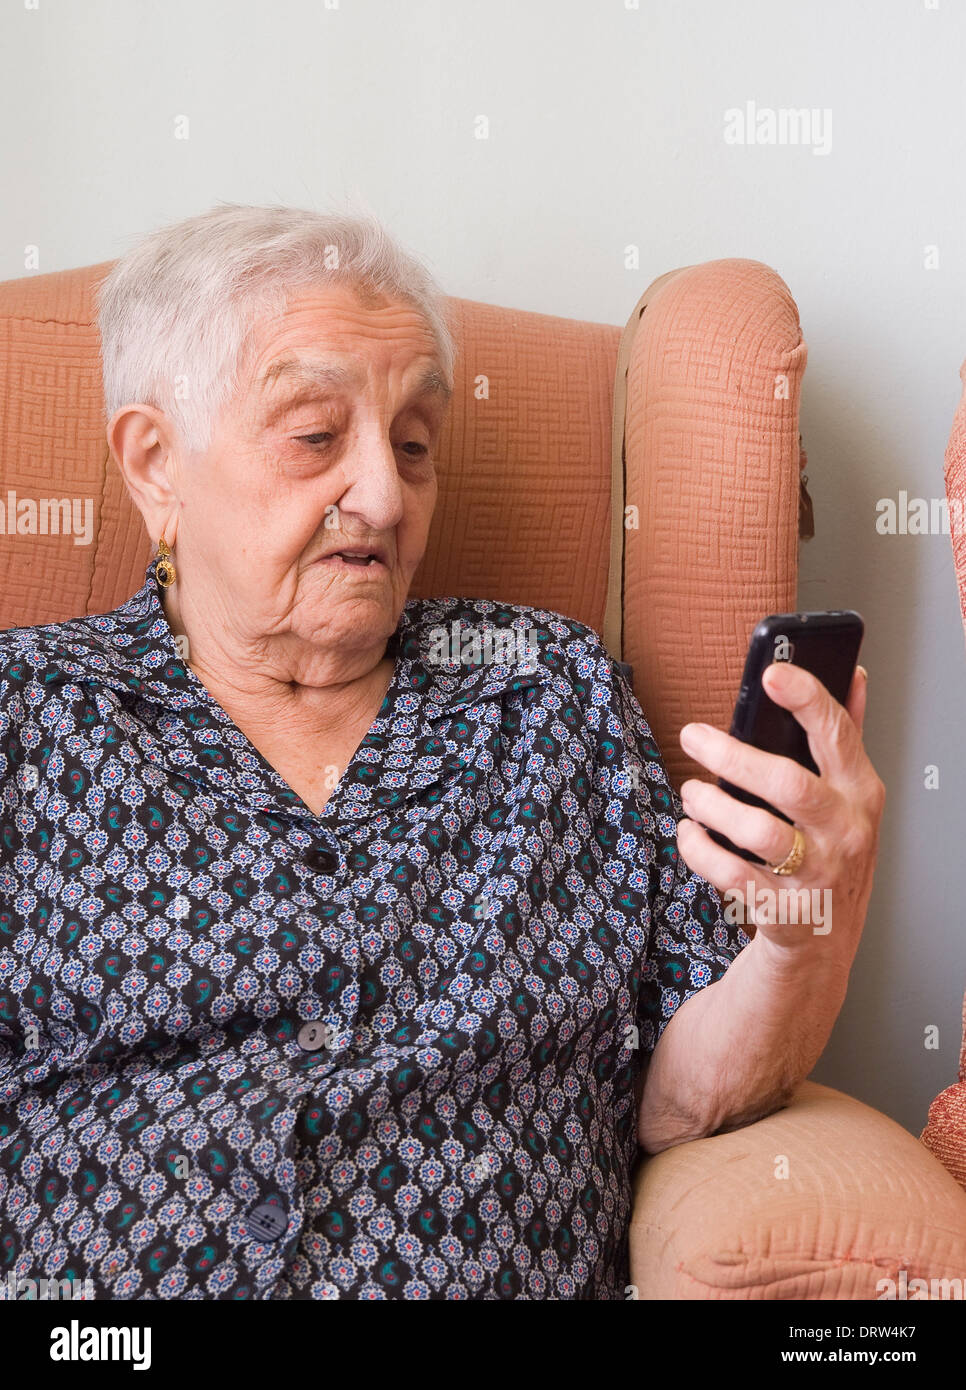 Elderly woman looking at a smartphone inside her home. Stock Photo